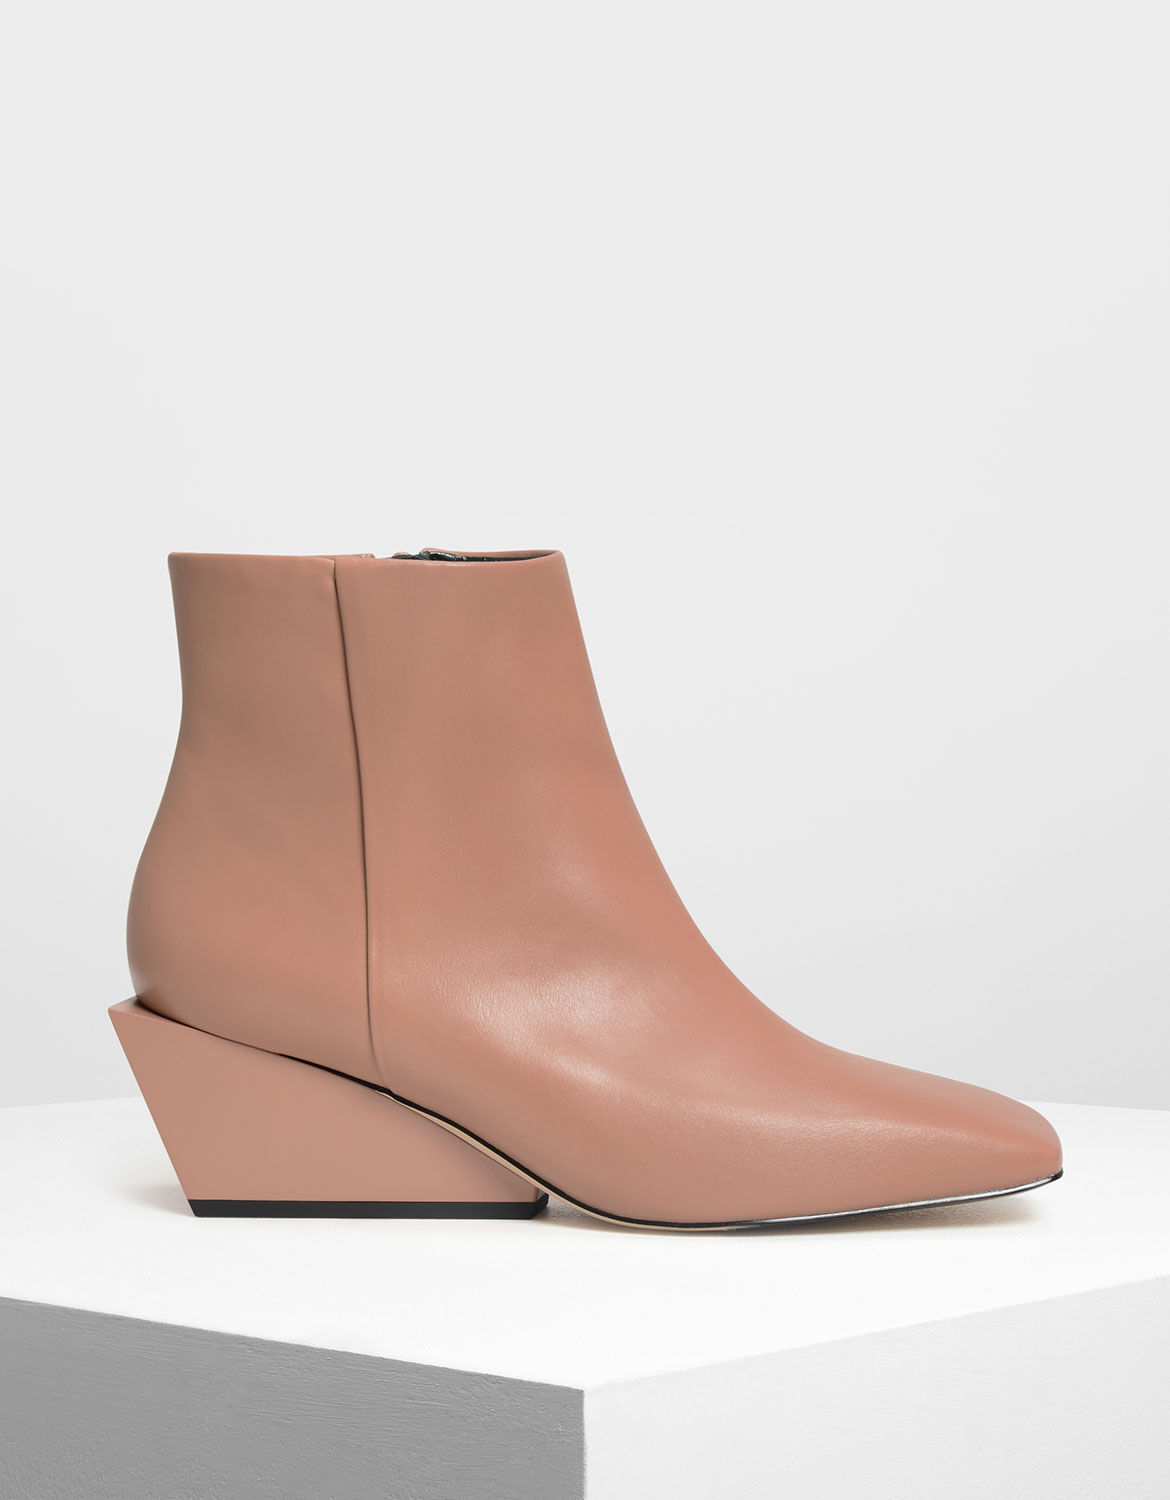 Nude Square Toe Wedge Boots | CHARLES 